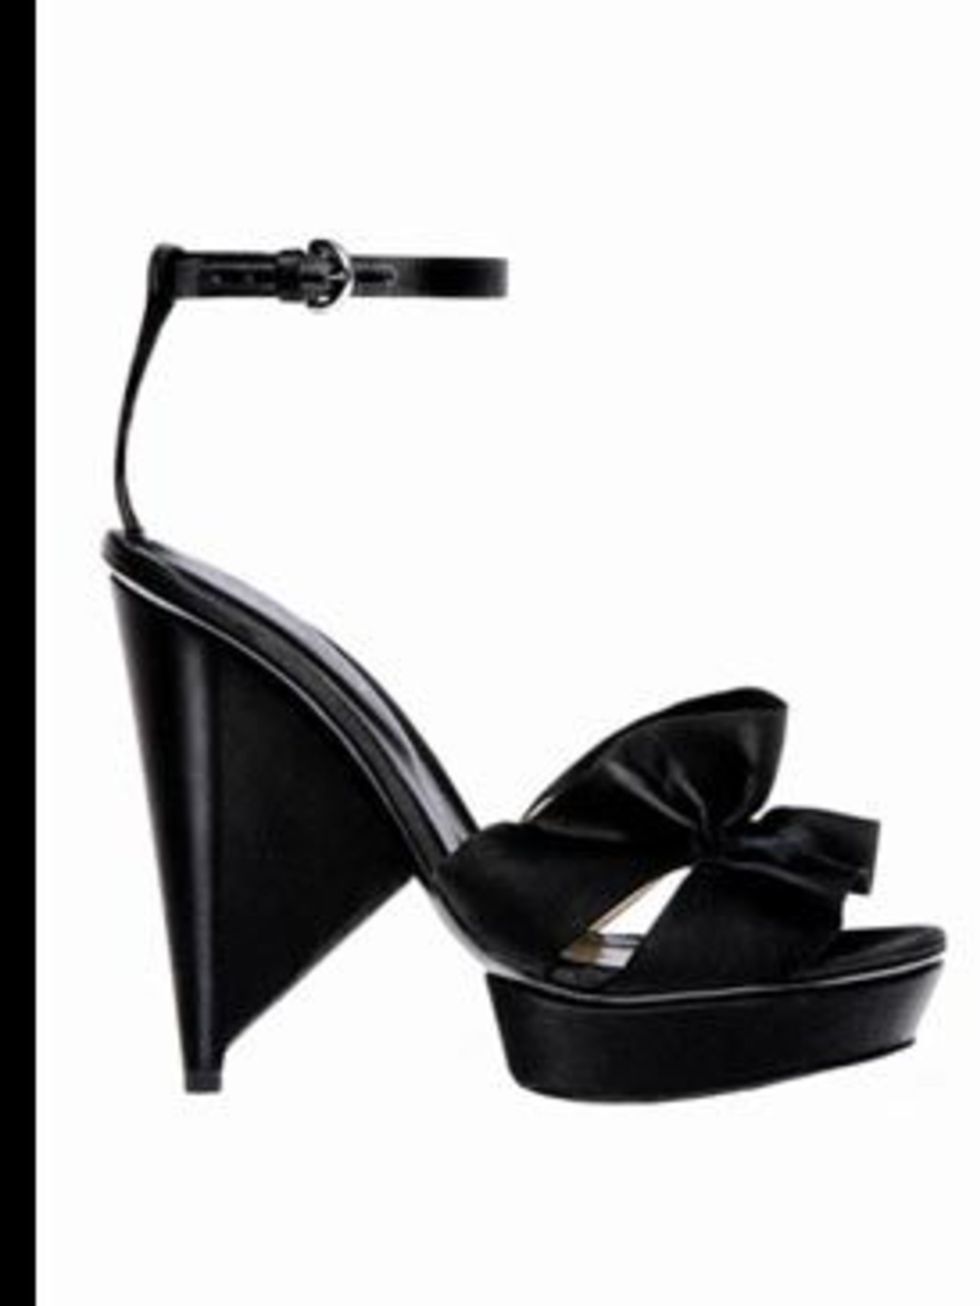 <p>Black ruffle sandals, £305, by Sergio Rossi, for stockists call 0207 811 5950</p>